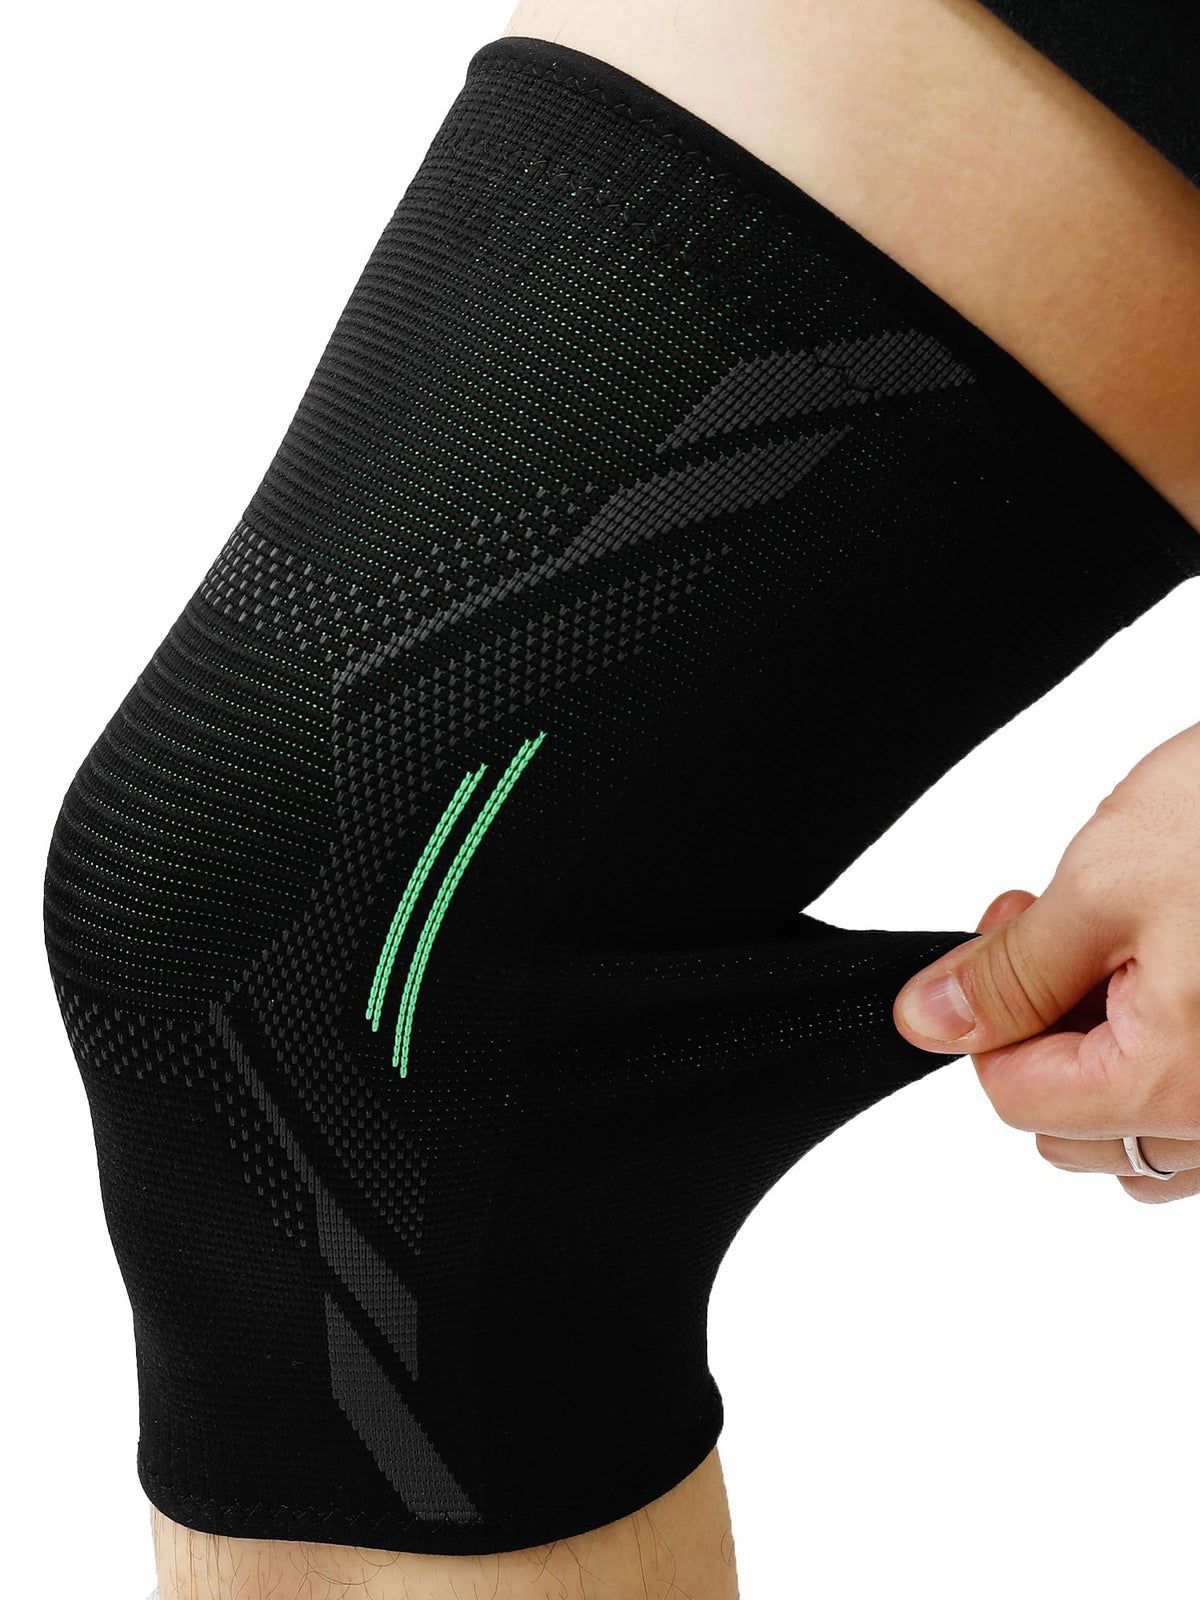 STRAUSS Sports Knee Cap for Men and Women | Knee Support for Men and Women